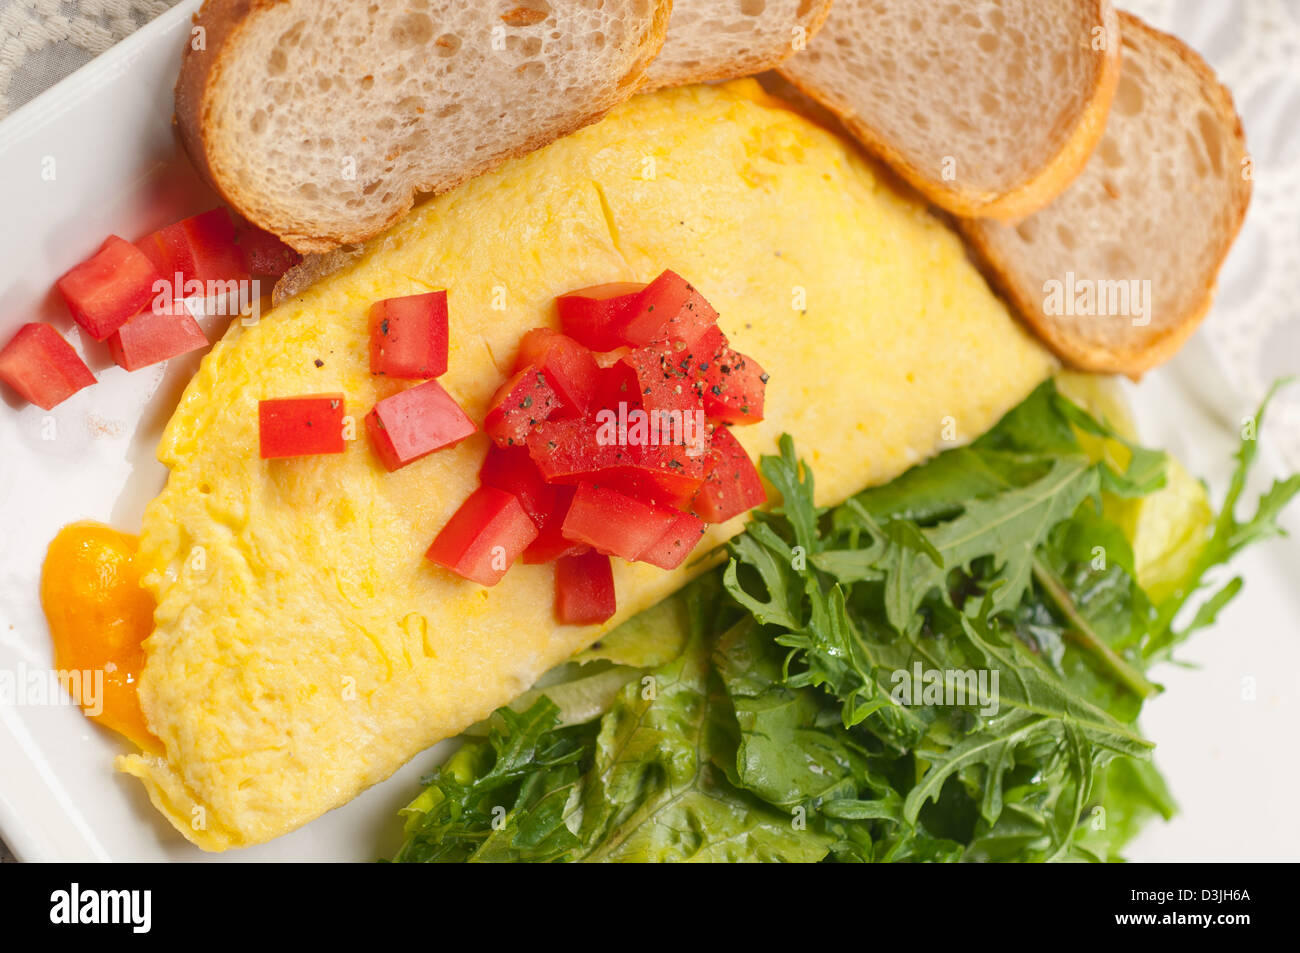 home made omelette with cheese tomato and rucola rocket salad arugola Stock Photo